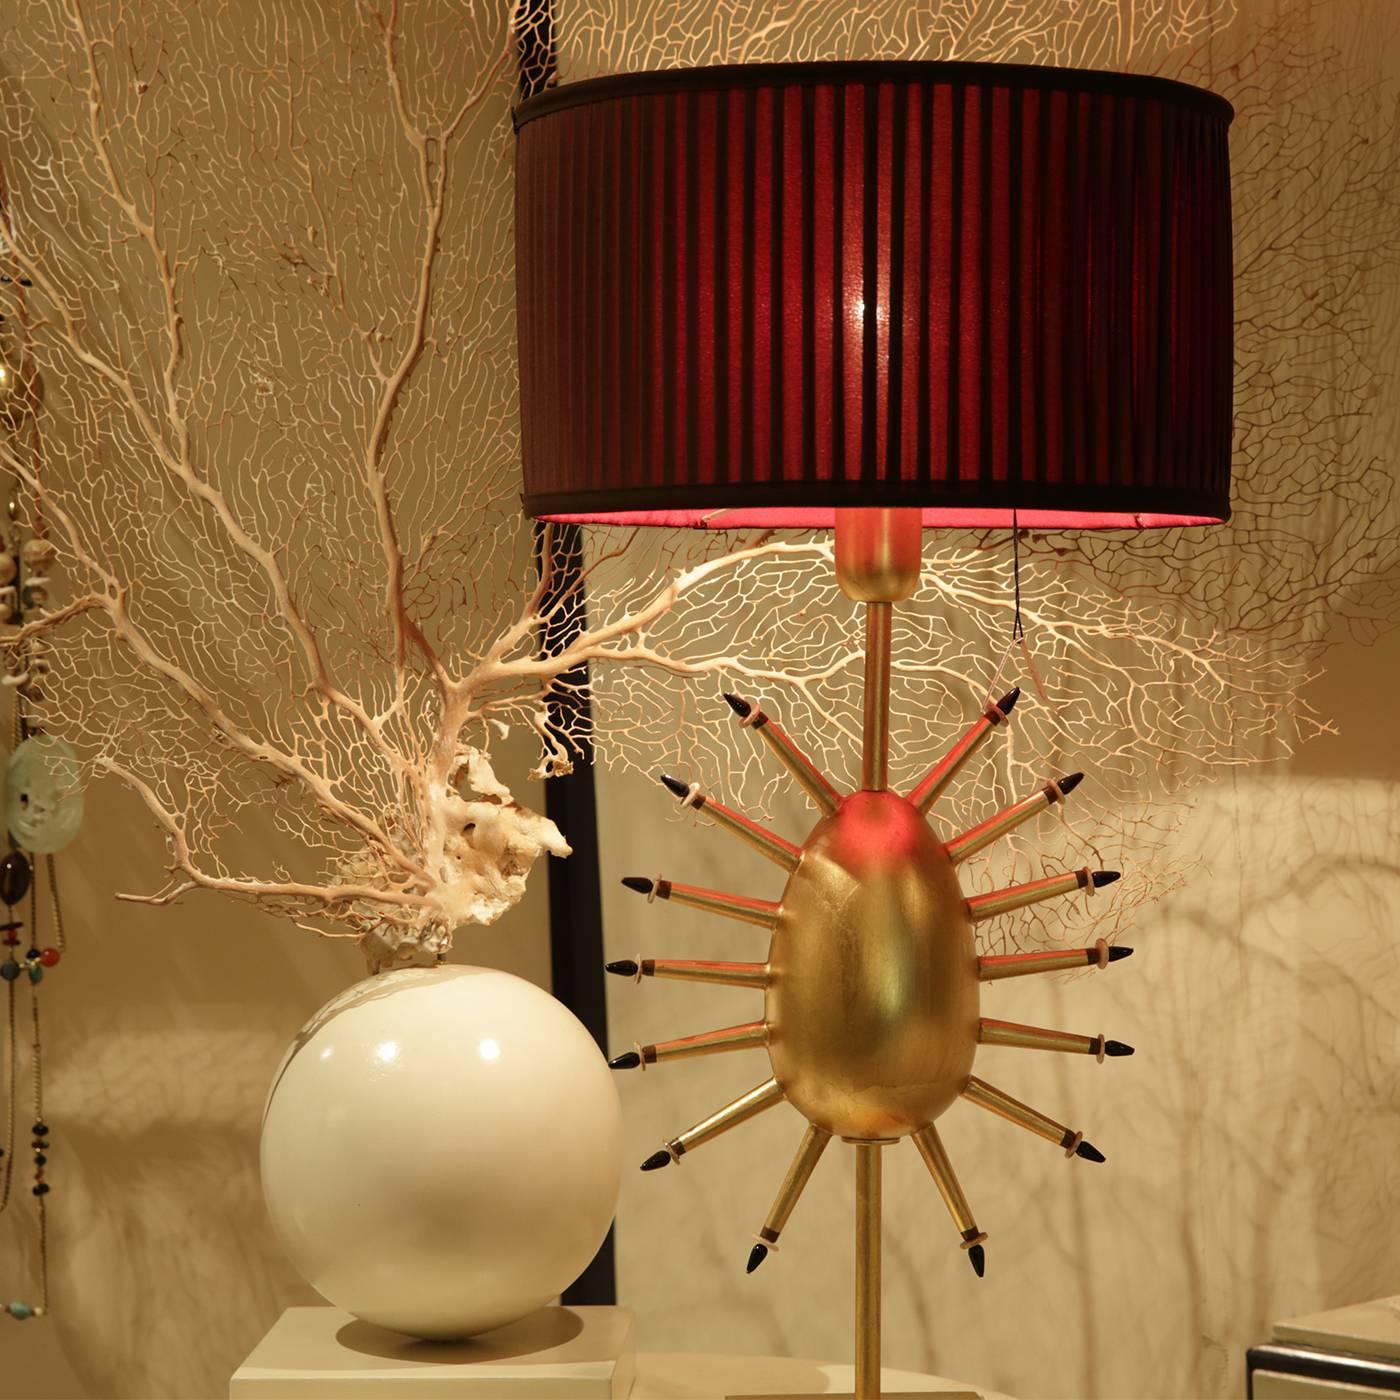 This radiant wooden table lamp in a golden finish by Bottiglieri sits with easy brilliance under a moody crimson shade of hand-sewn silk lining. The central form of the egg and its extending rays of precious stones express transformation.